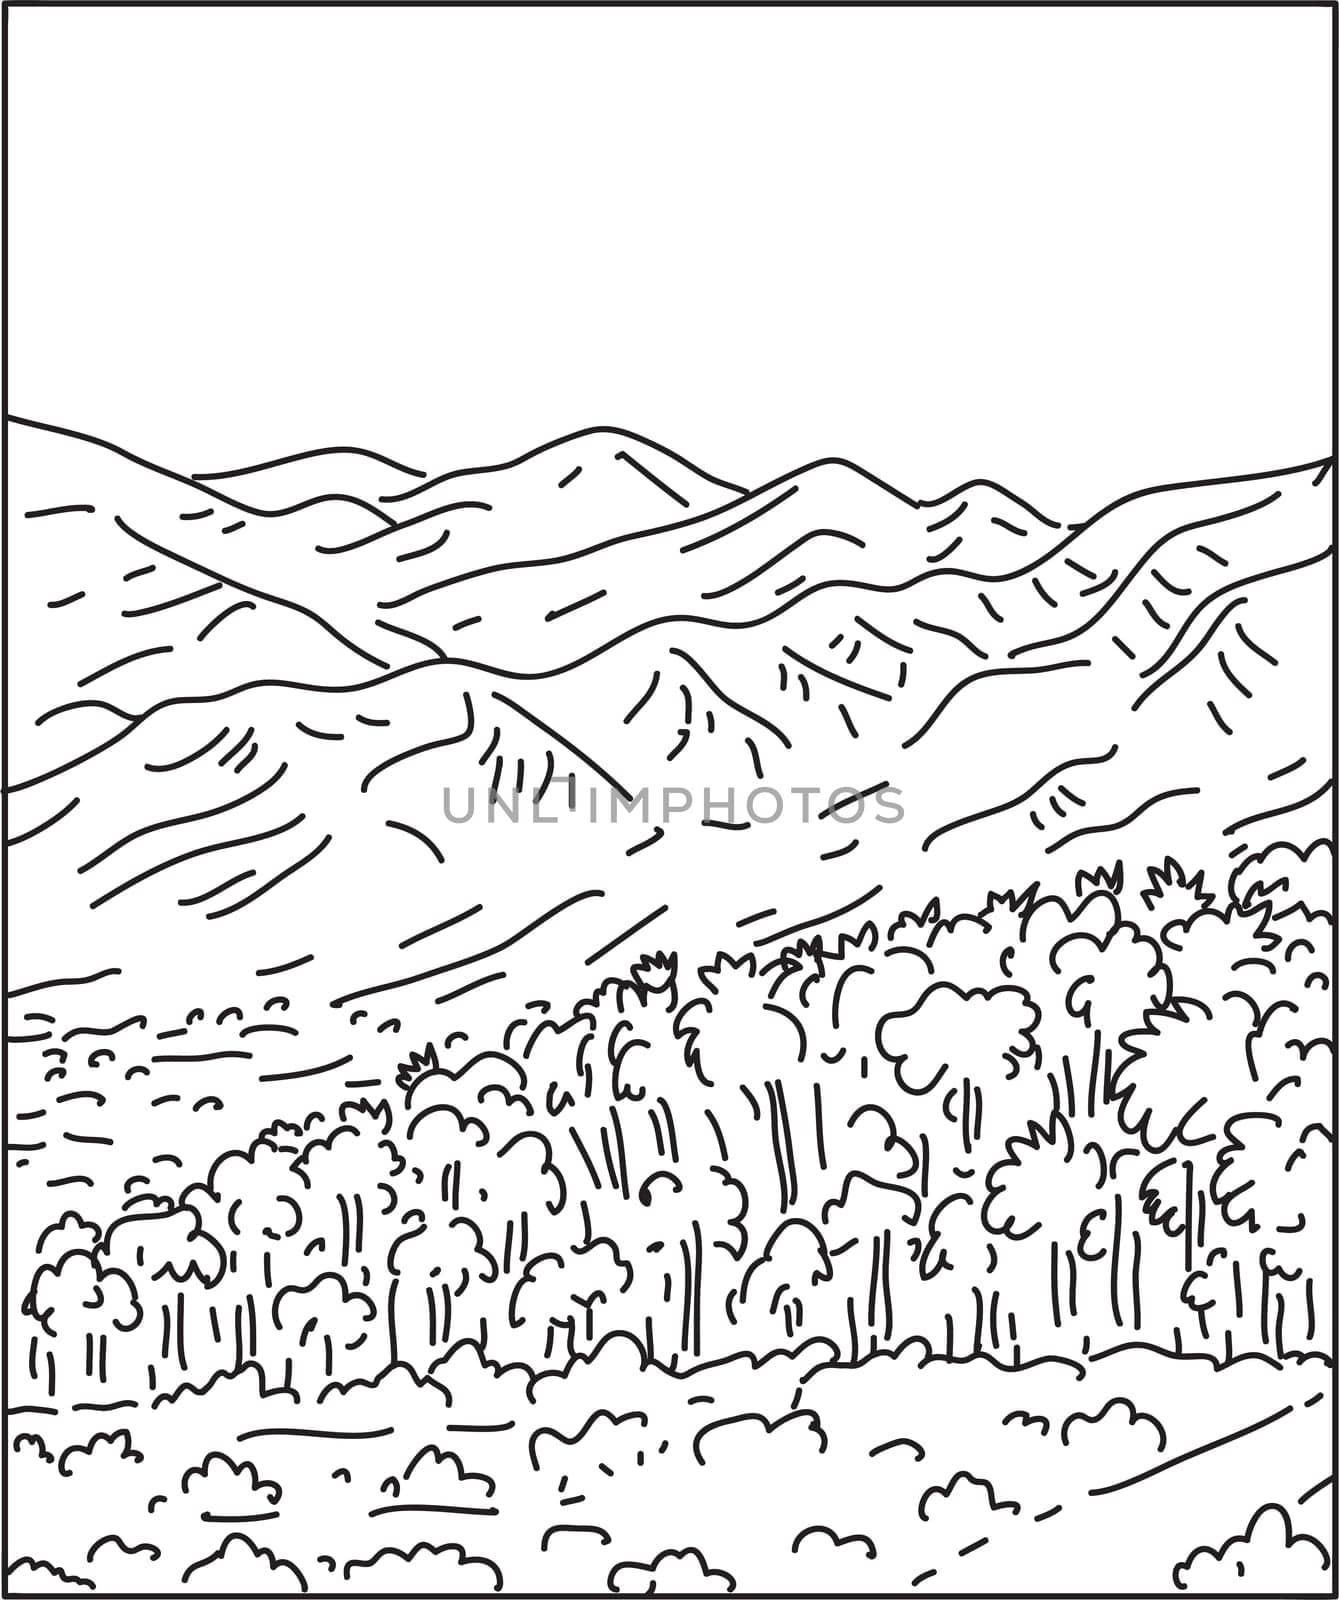 Mono line illustration of Sand to Snow National Monument located in San Bernardino County and northern Riverside County, Southern California done in monoline line art style.